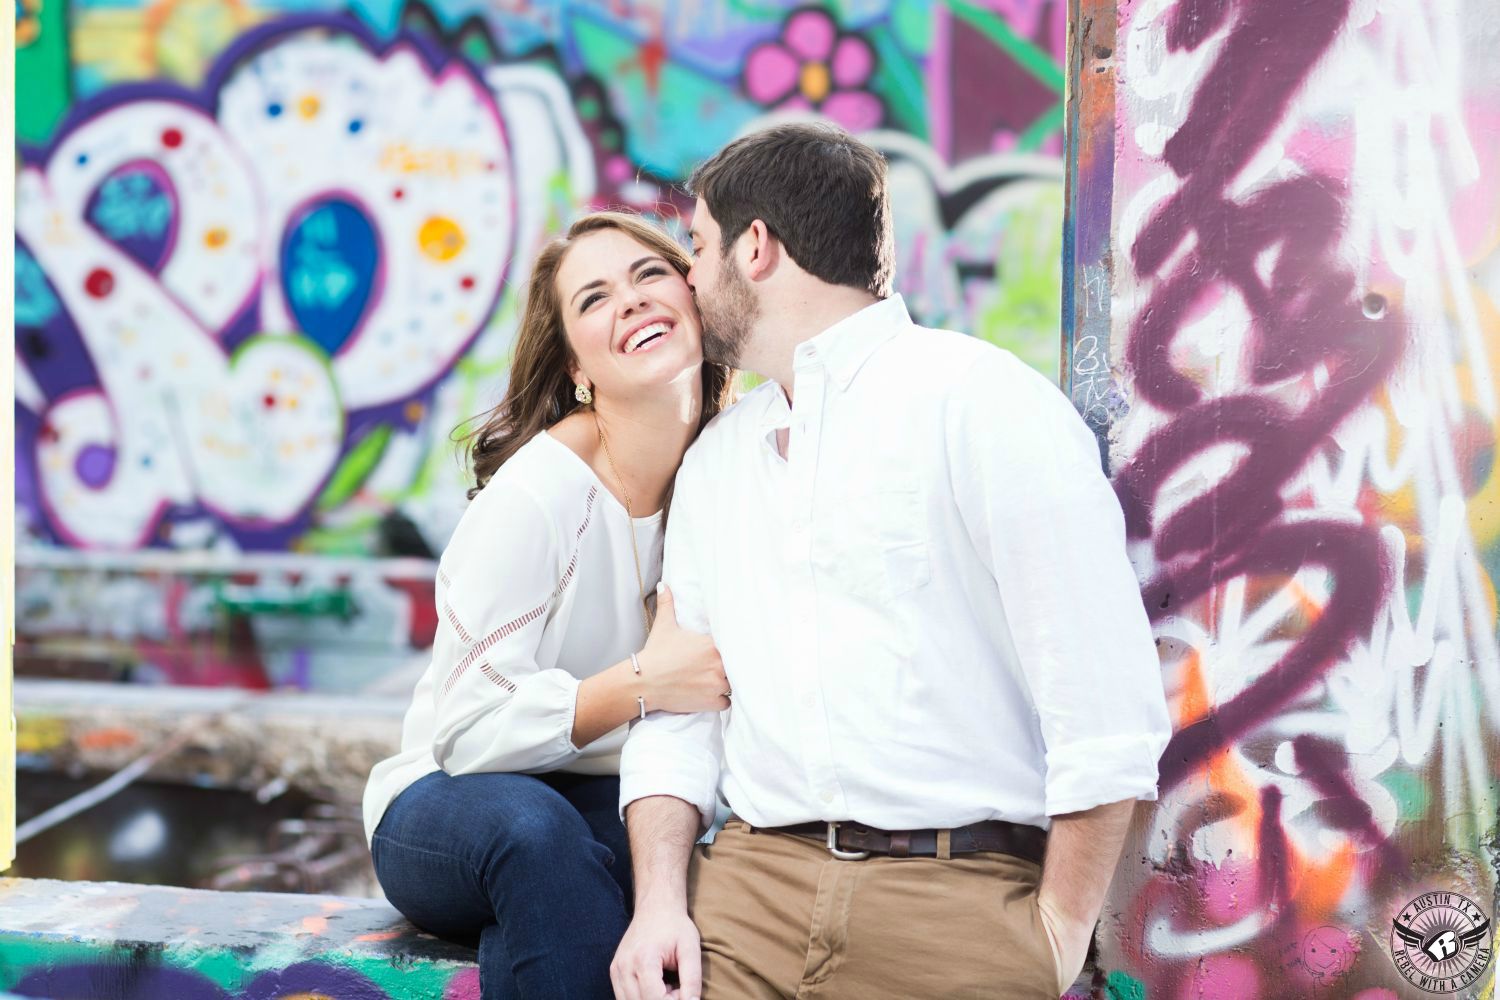 engagement of brunette girl  in white blouse  and blue jeans laughs as guy in white button up shirt in tan pants kisses her cheek at the castle hill graffiti park with lots of colorful painted art all over the wall in this fun engagement portrait